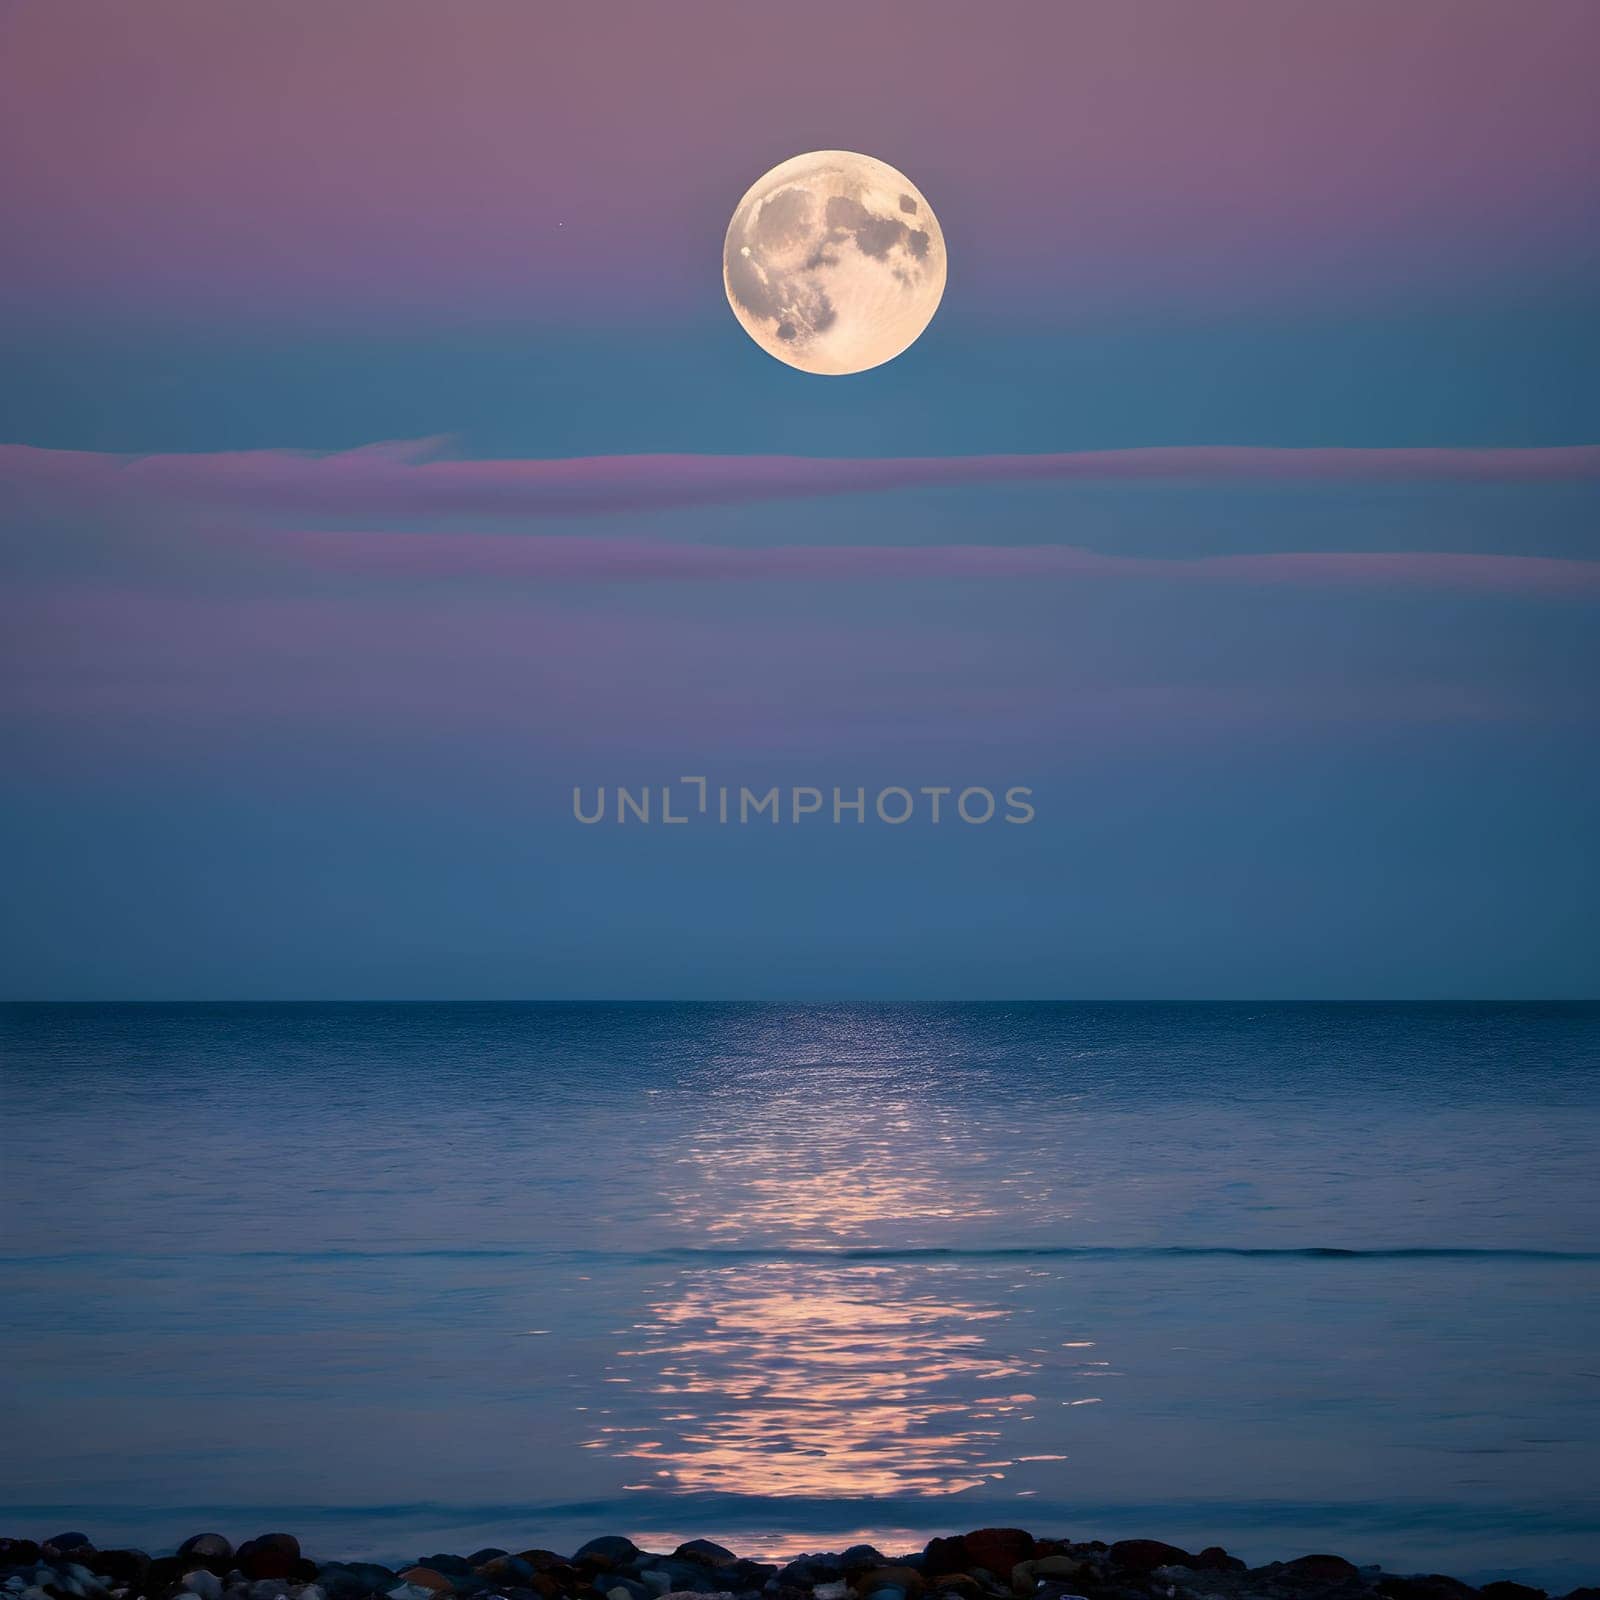 Twilight's Glow: Immersing in the Serenity of the Super Moonlit Evening Seascape by Petrichor